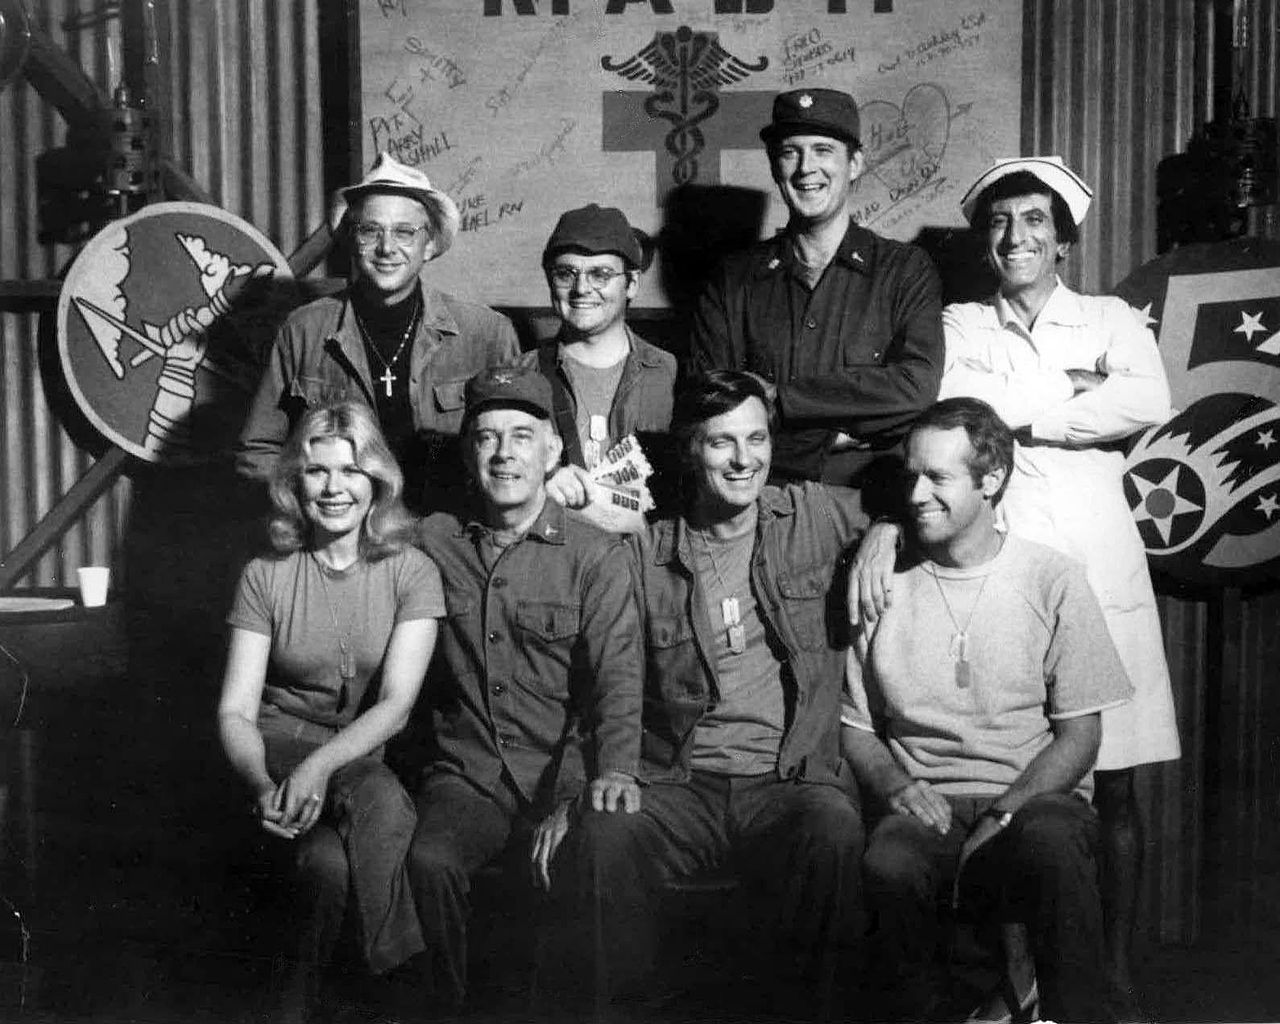 The Seven Most Anti-War Episodes of M*A*S*H